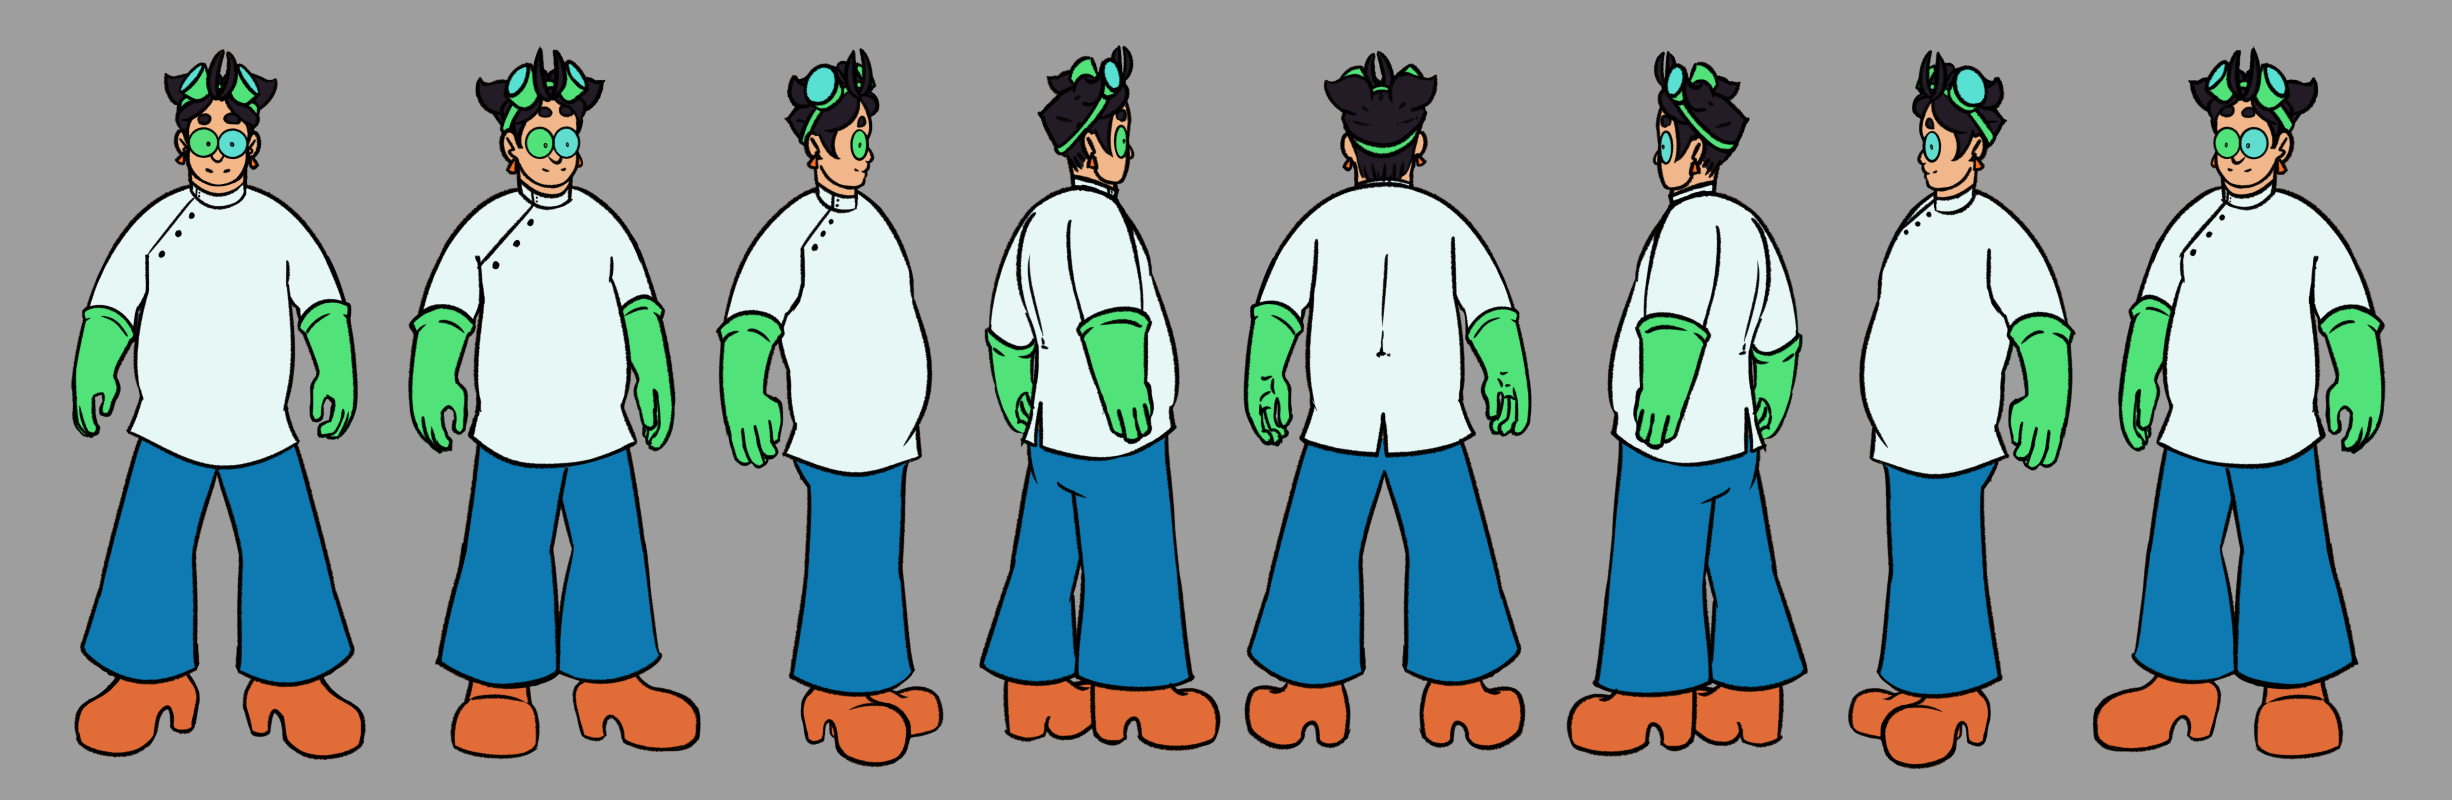 A character design turnaround of a mad scientist with black hair, a white mad scientist lab coat, green gloves, flared jeans, orange platform boots, and two pairs of goggles.